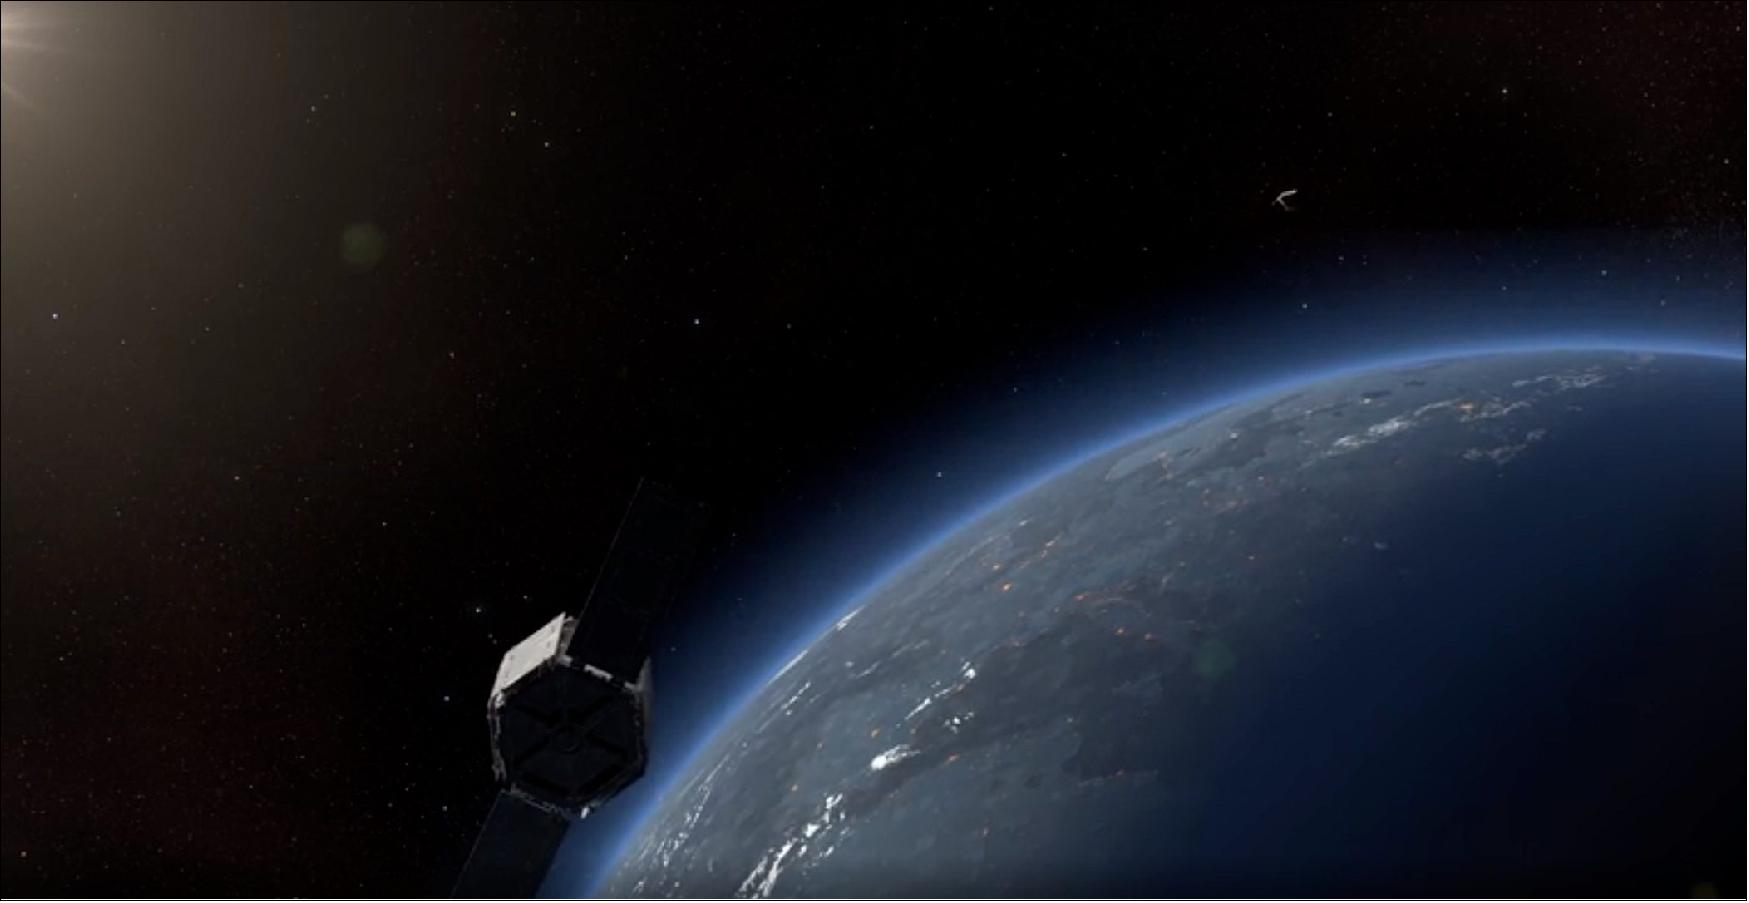 Figure 8: Artists impression of a secure communications satellite. Telecommunications are becoming increasingly crucial to our society, economy and security, including in support of Europe's strategic autonomy (image credit: ESA)